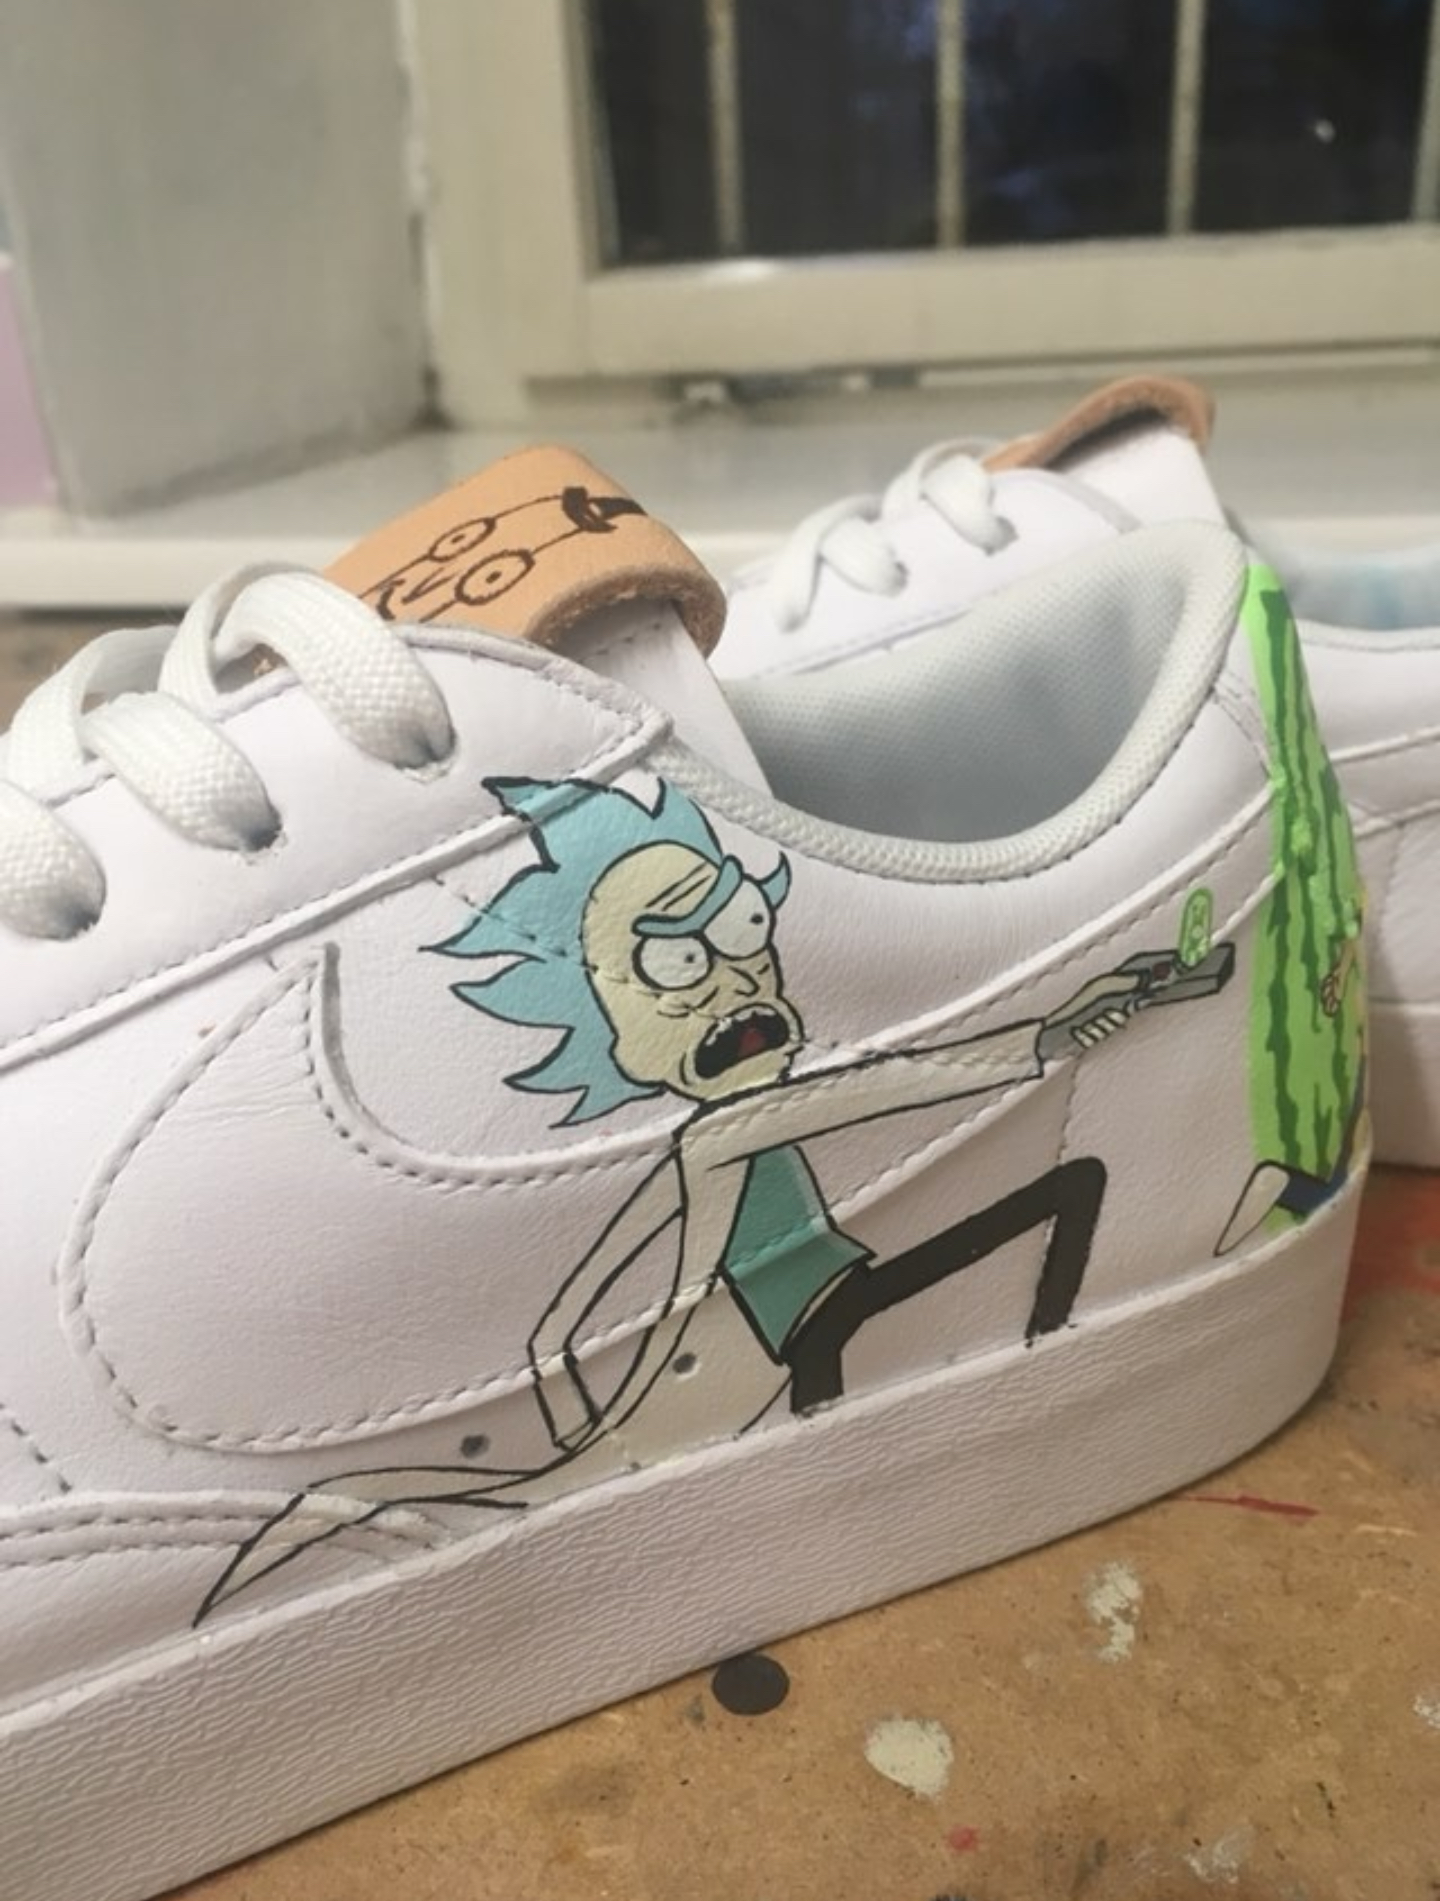 rick and morty customs Tornschuhjette 3